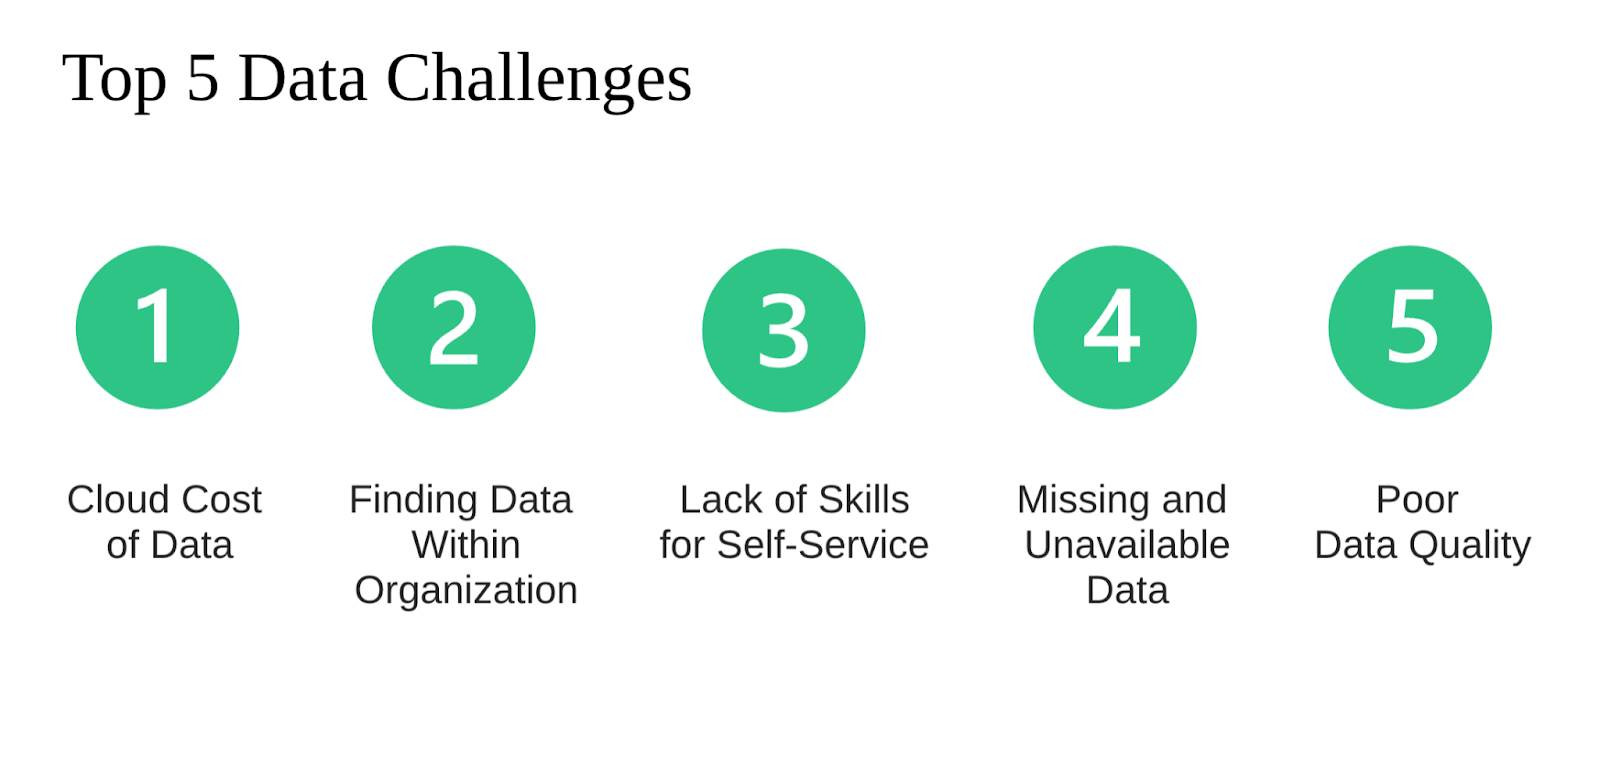 Top 5 challenges of data today, as they related to AI readiness